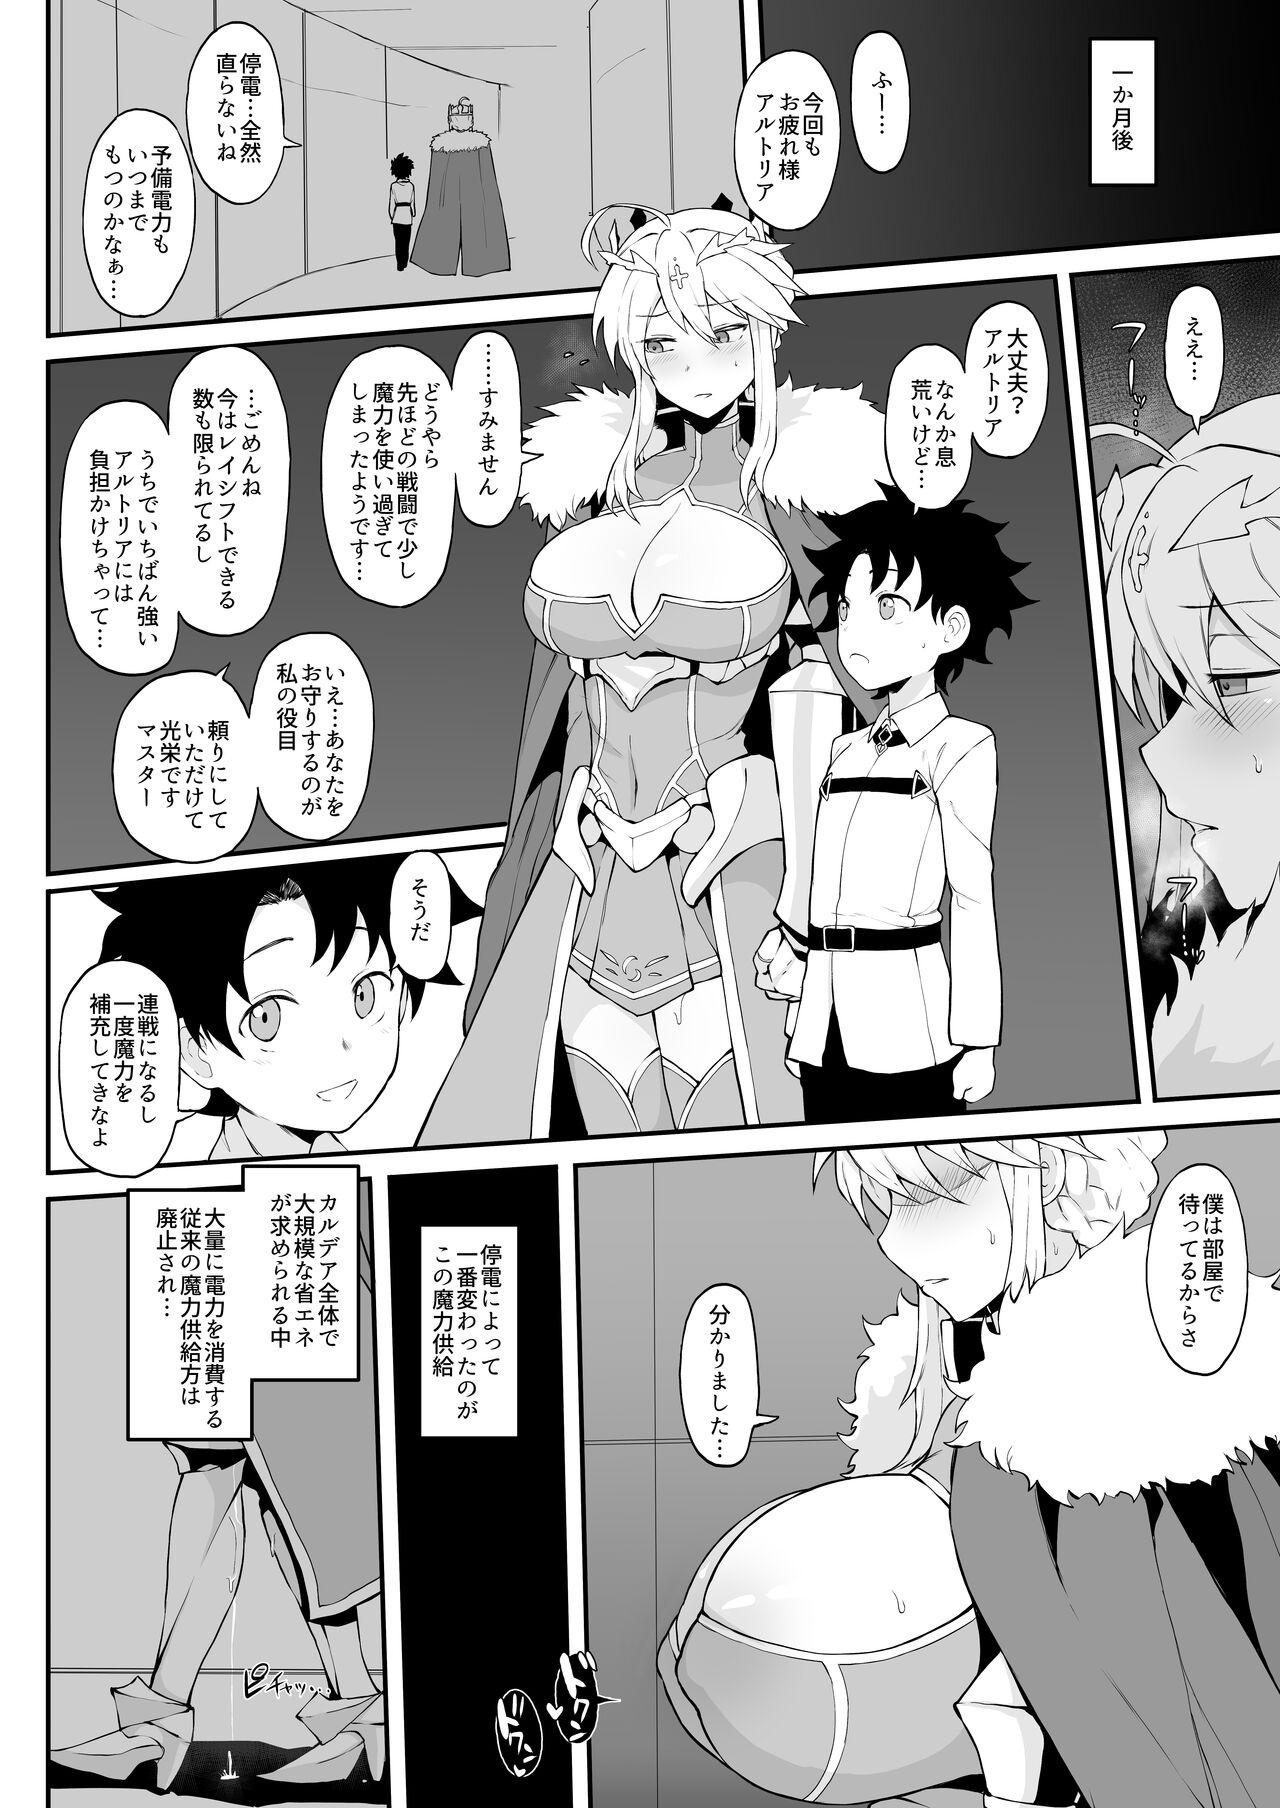 Gay Hunks No Title - Fate grand order Load - Page 4